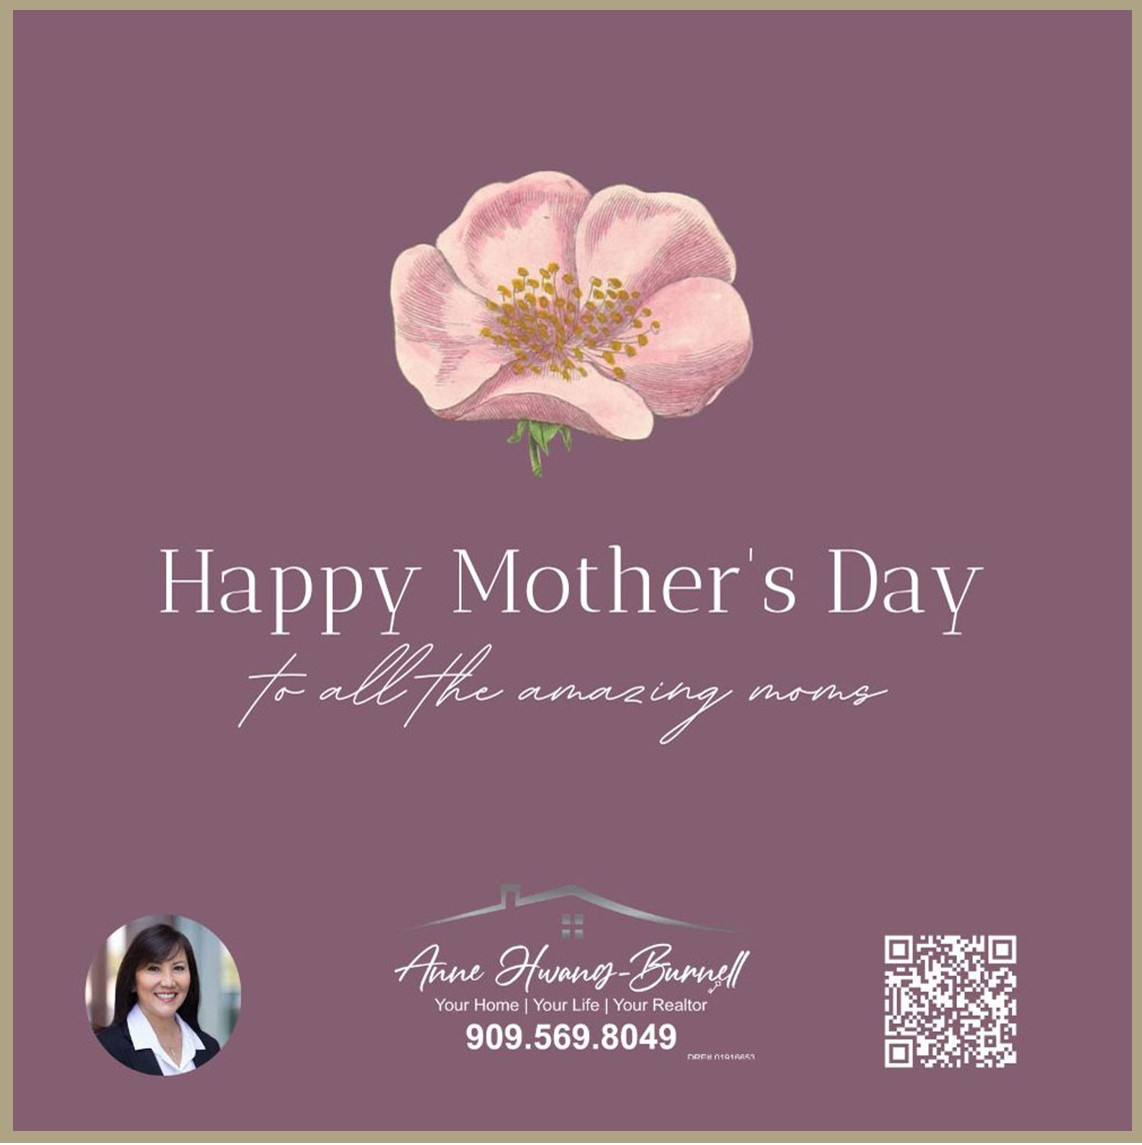 Happy Mother's Day to all the fantastic moms and mother figures! ❤️💐💞

#annehwangburnellrealtor #2024mothersday #celebratingmom #motherfigure #mommyday